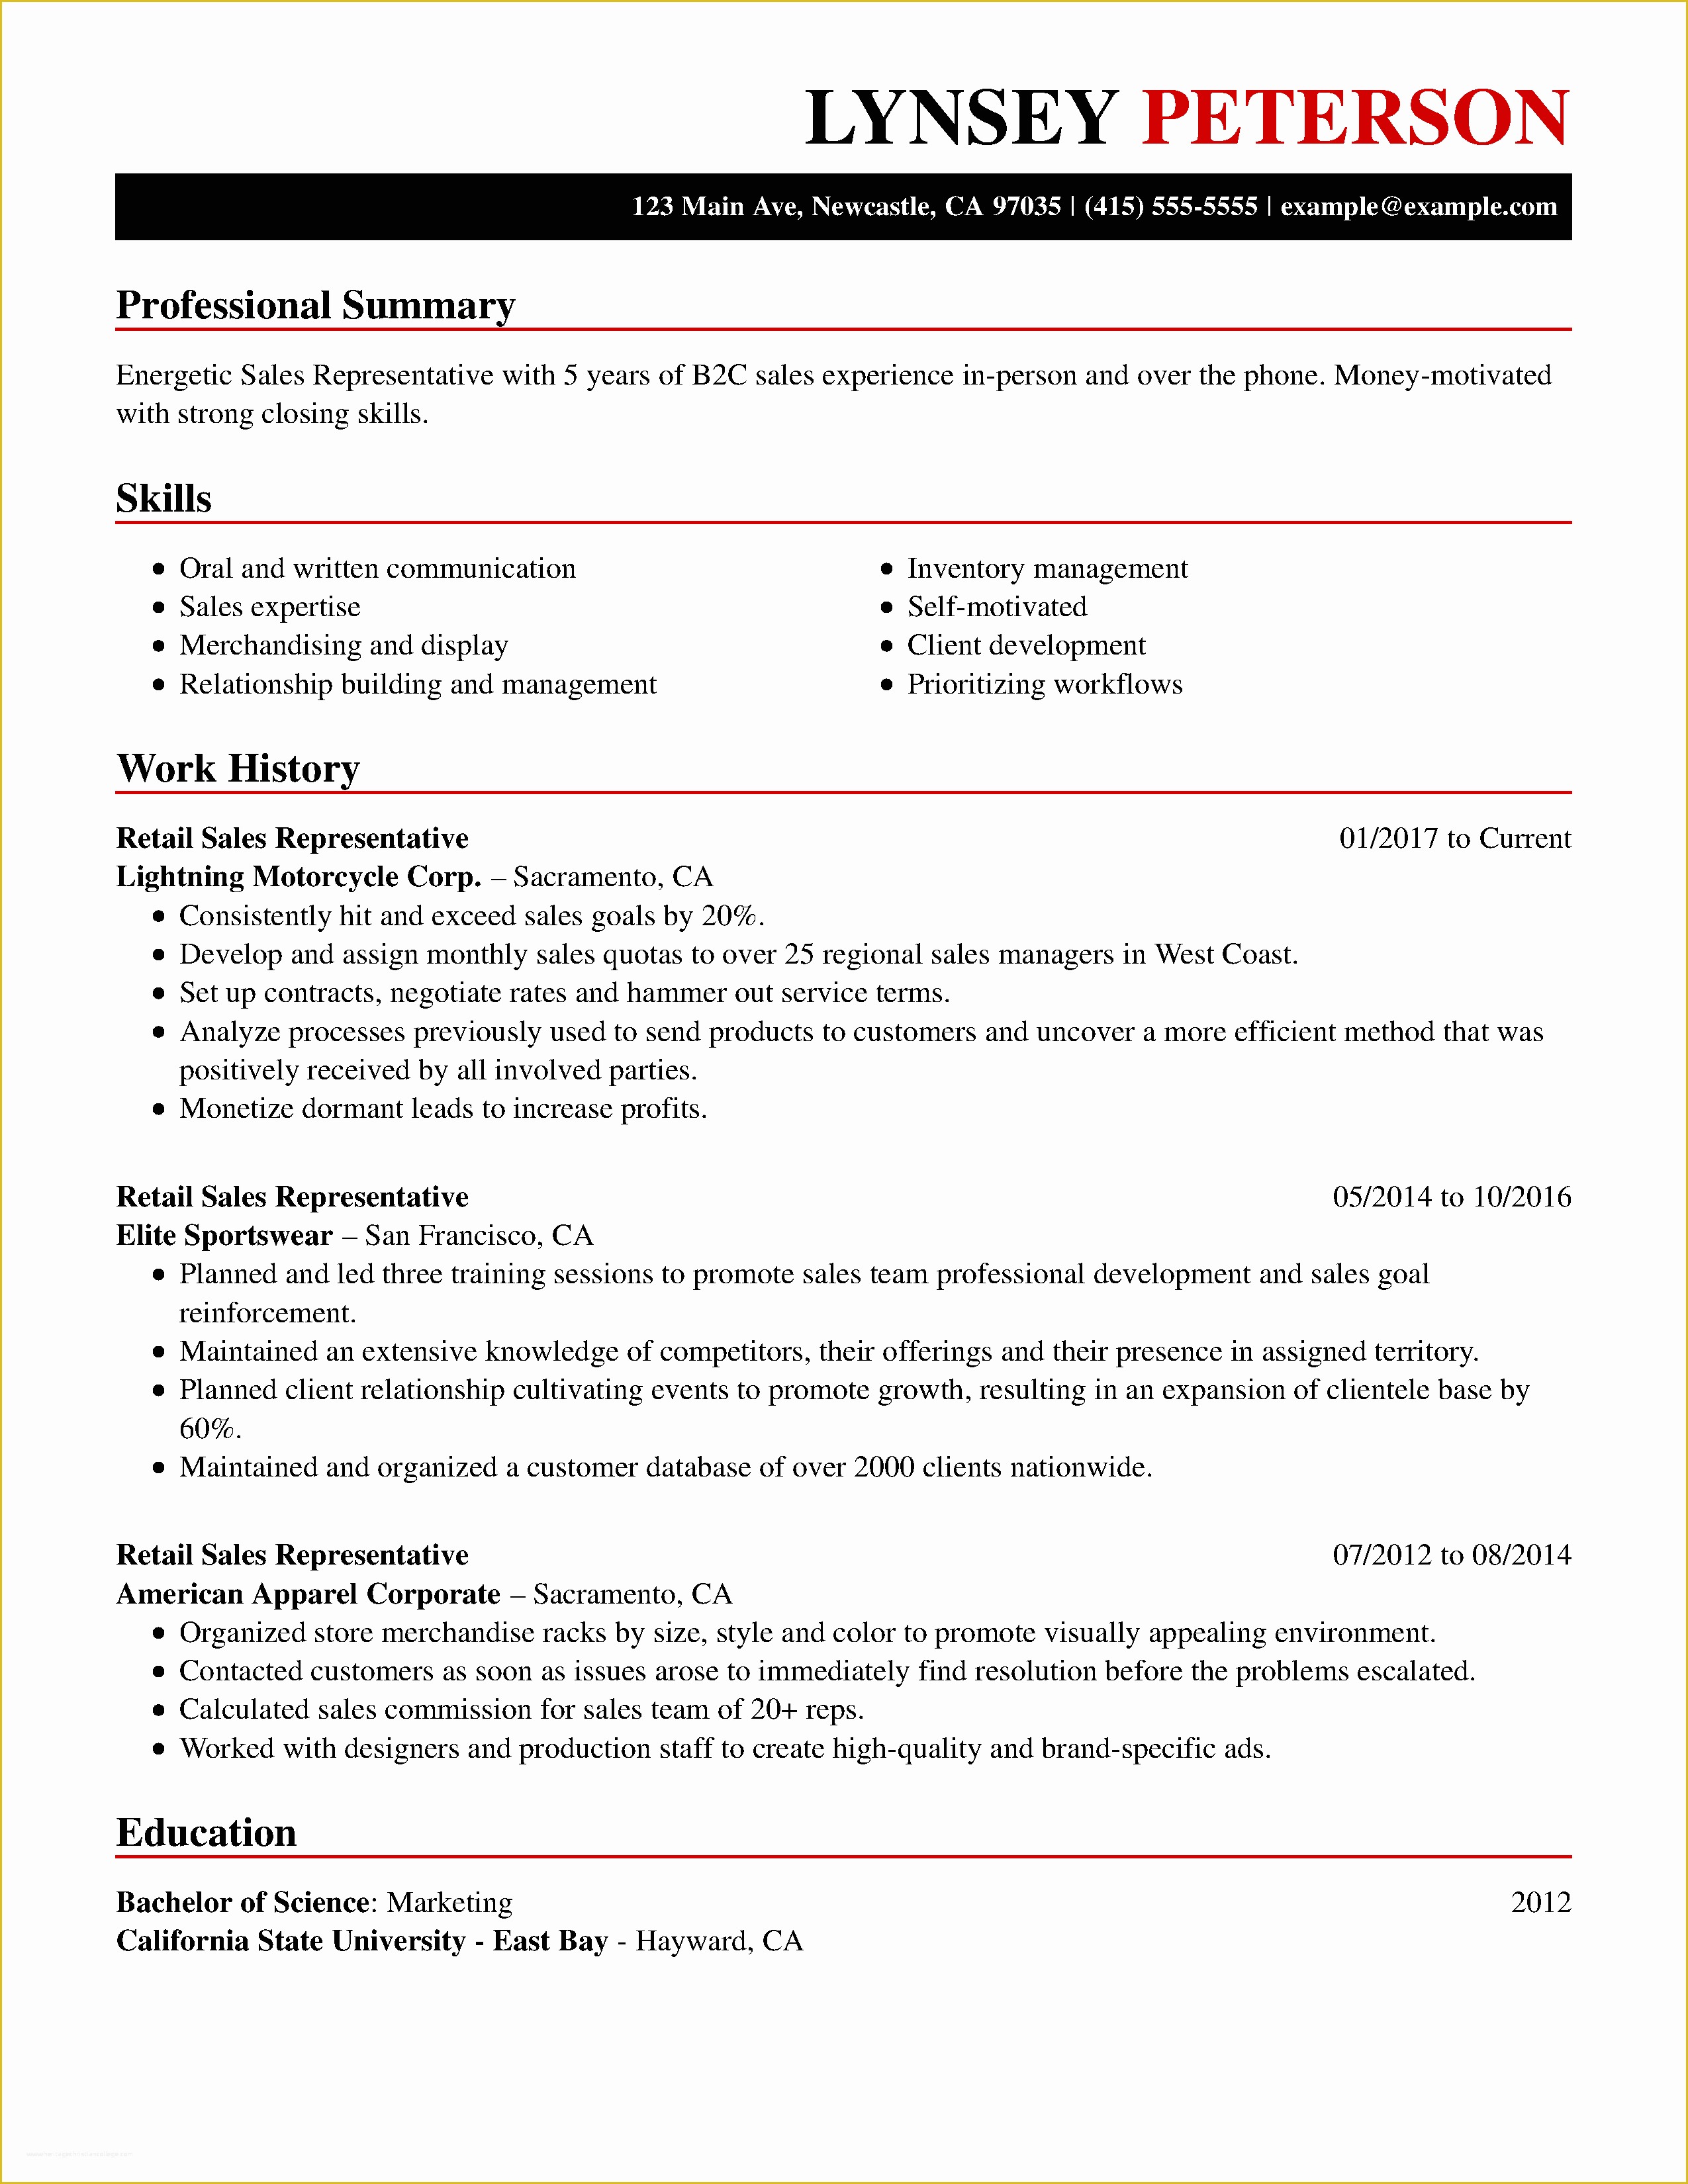 Free Sample Professional Resume Template Of Free Resume Examples by Industry & Job Title